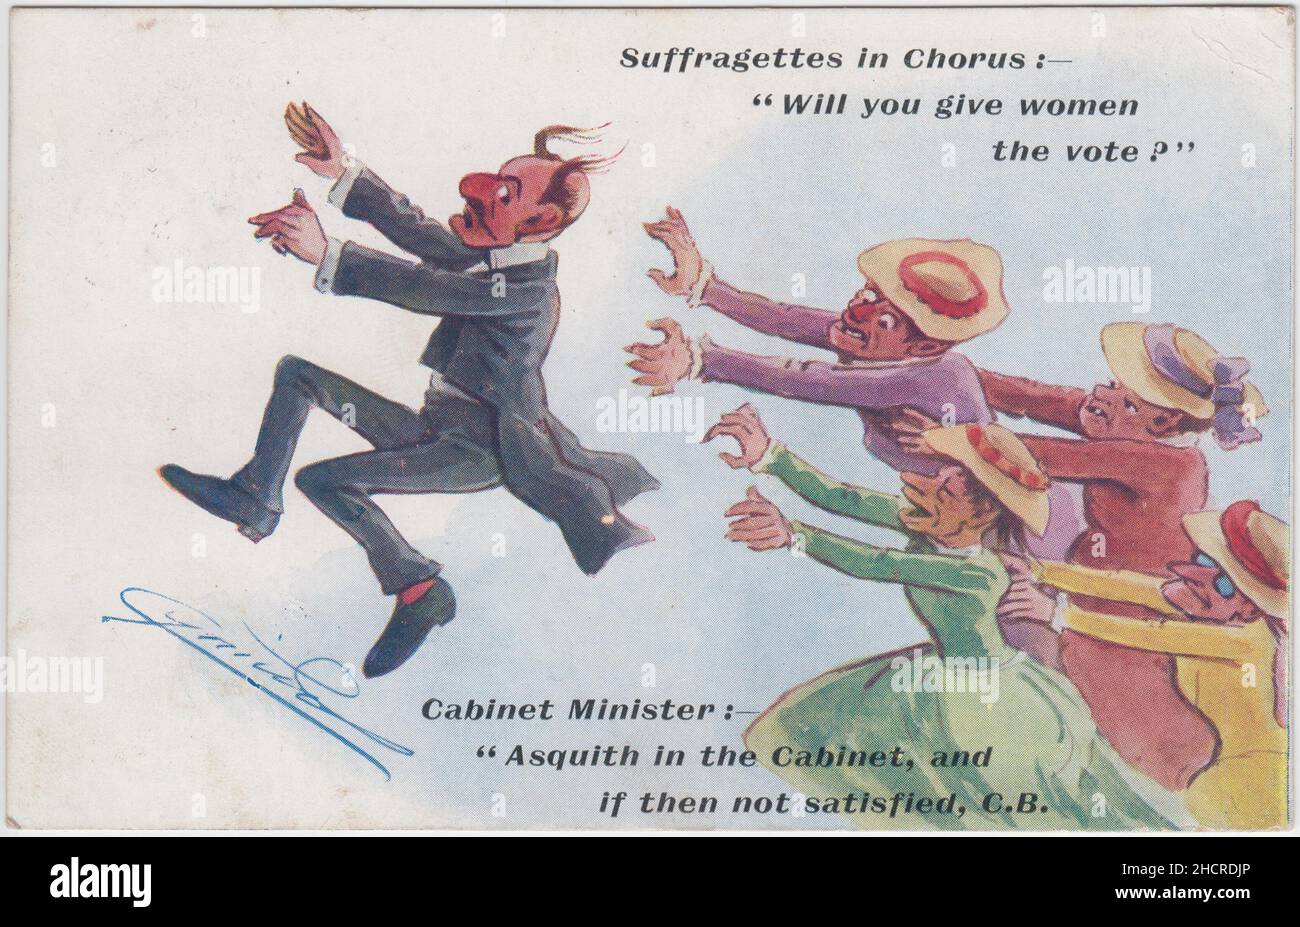 'Suffragettes in chorus: 'Will you give women the vote?' Cabinet Minister: 'Asquith in the Cabinet, and if then not satisfied, C.B. [Campbell-Bannerman]': cartoon showing a man with a moustache & comb-over hair fleeing from four women portrayed as older, ugly & lacking teeth, all wearing straw hats and running with outstretched arms (in the style of a zombie film chase). The image is on a postcard that was sent in 1908 and was drawn by Cynicus, an alias of the artist Martin Anderson, (1854-1932) Stock Photo